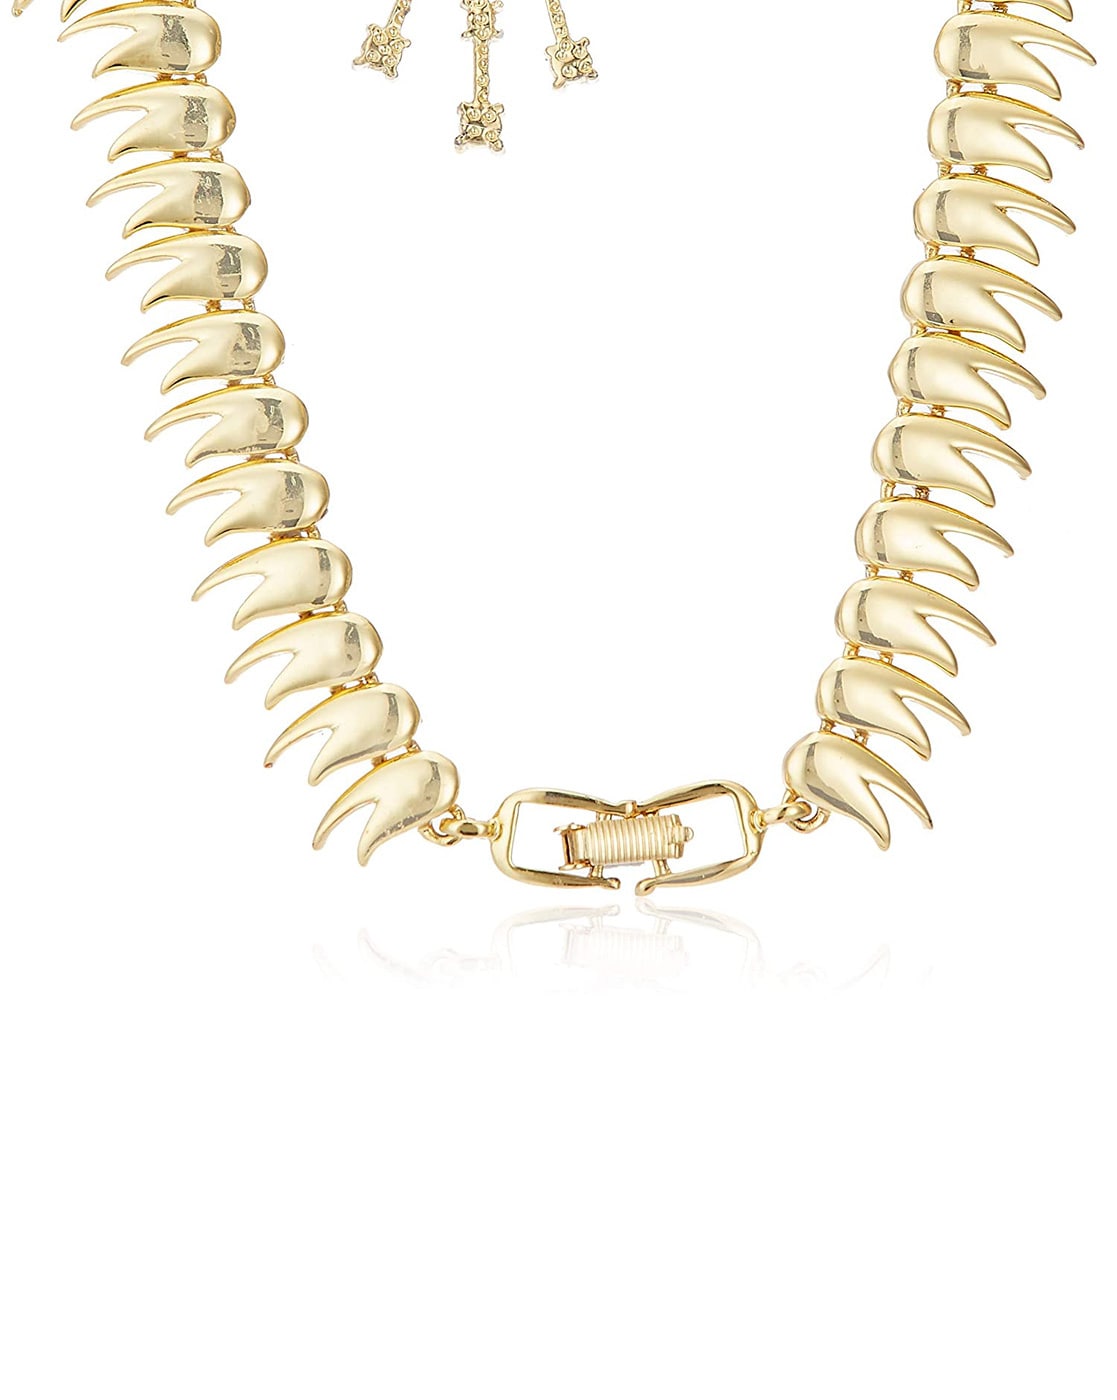 24 KT Gold-Plated Signature Austrian Crystal Necklace Set